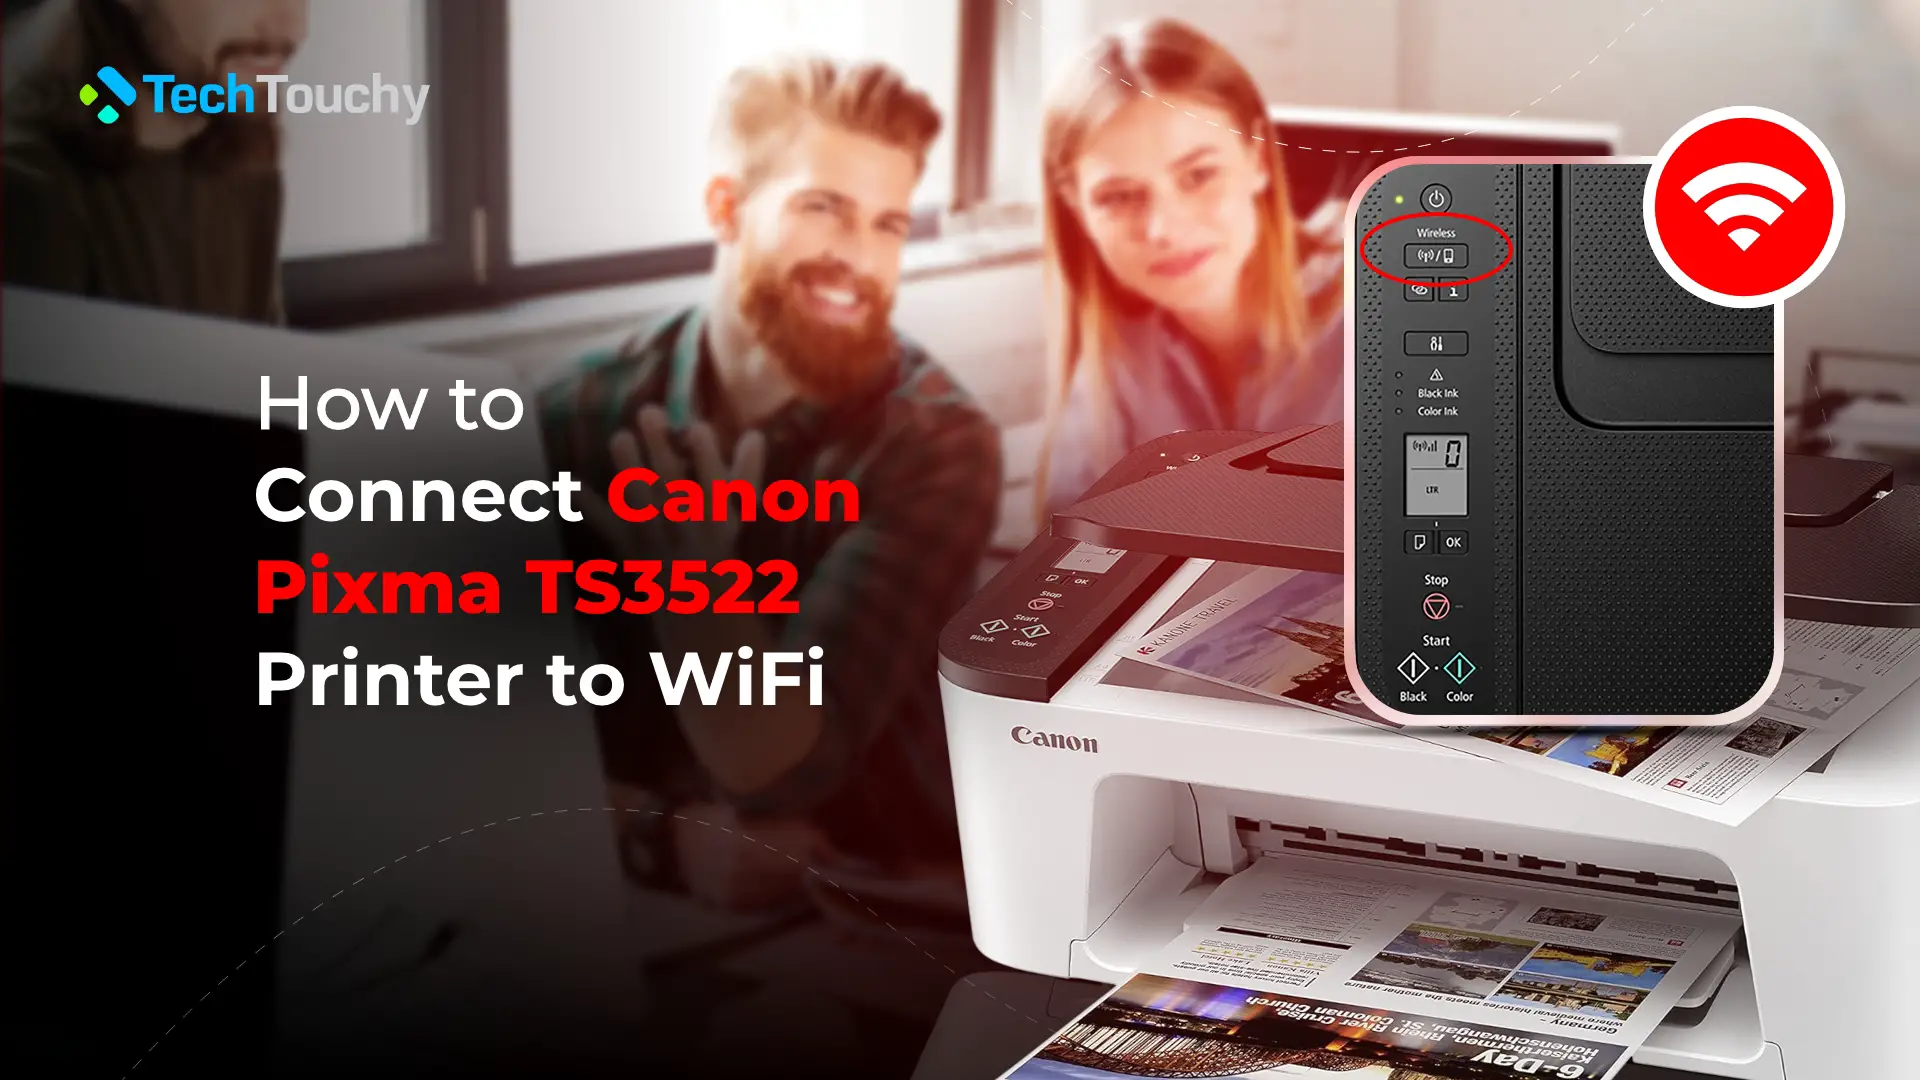 How to Connect Canon Pixma TS3522 Printer to WiFi ΓÇô Full Guide